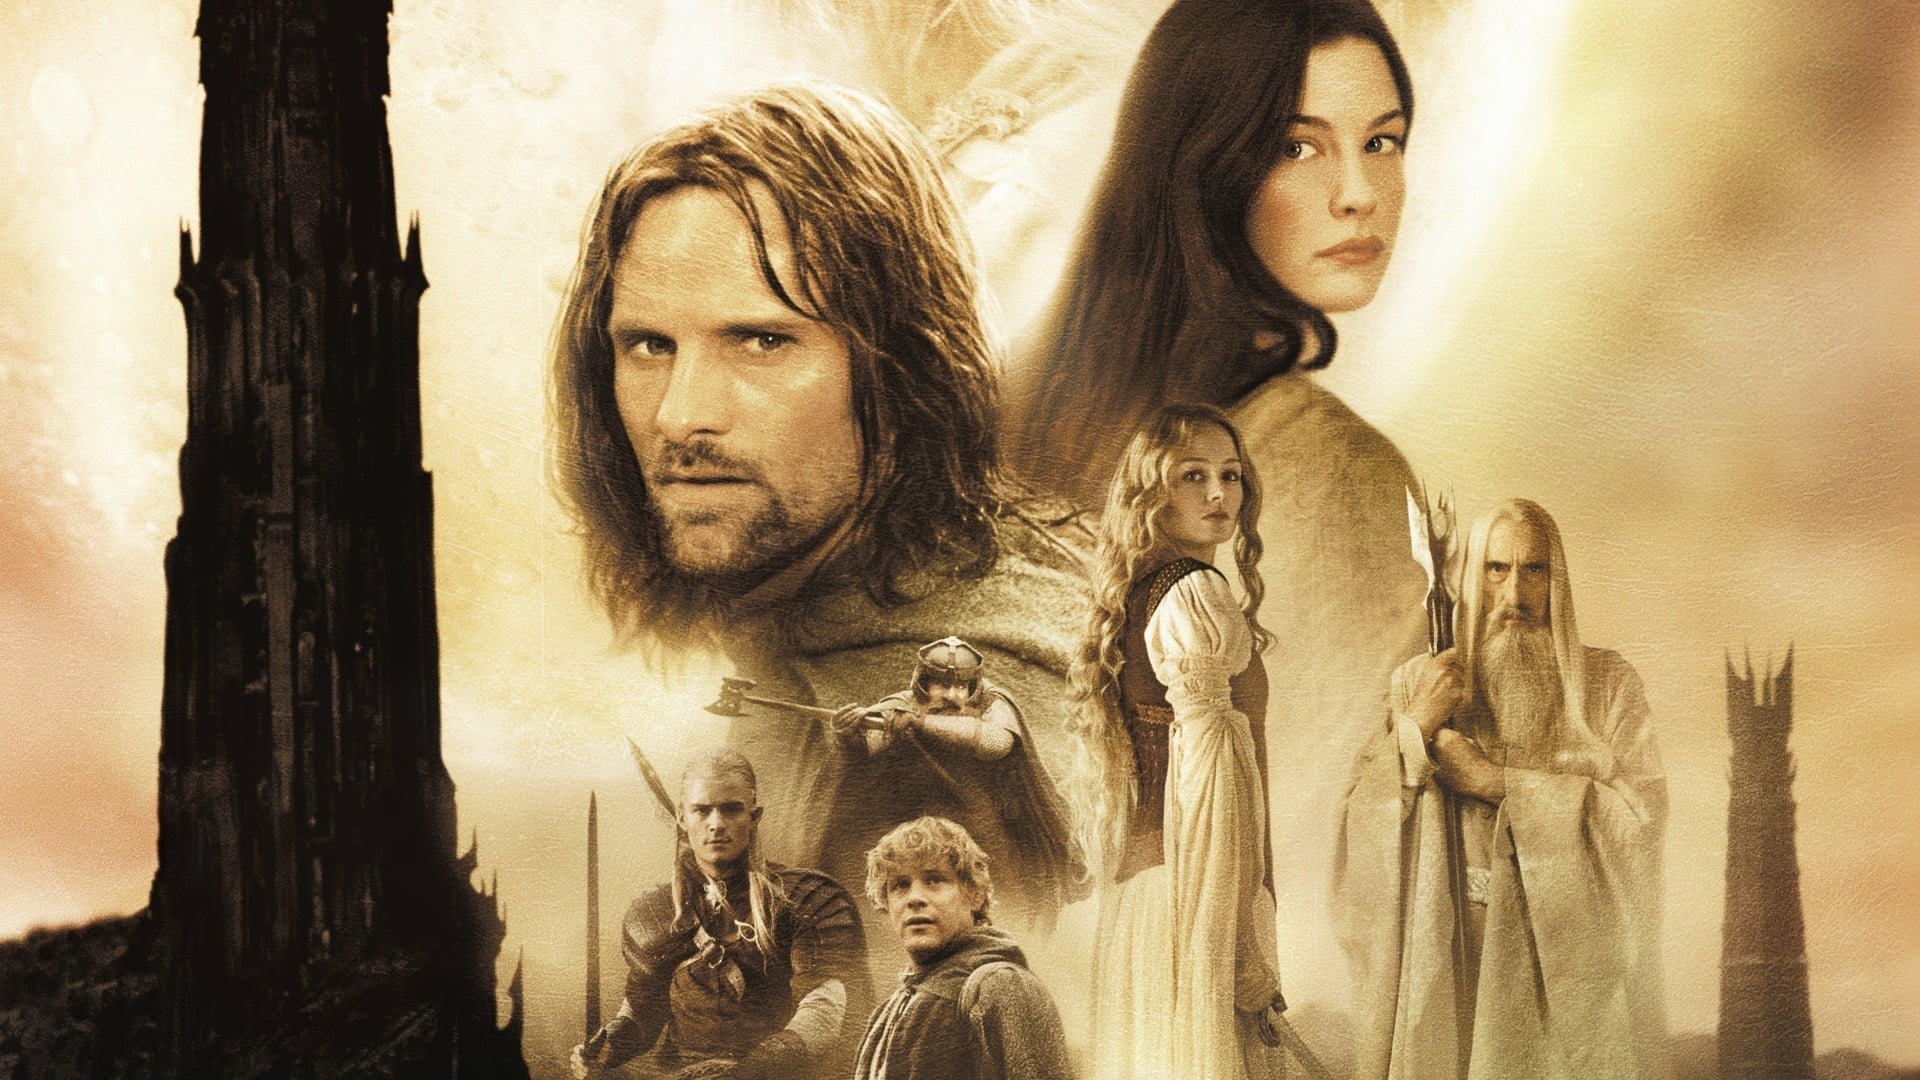 AMC Theatres on X: Thanks for participating in the LOTR trivia tonight,  get your tickets to see THE FELLOWSHIP OF THE RING in #IMAX at  #AMCTheatres:  As we sign off, we